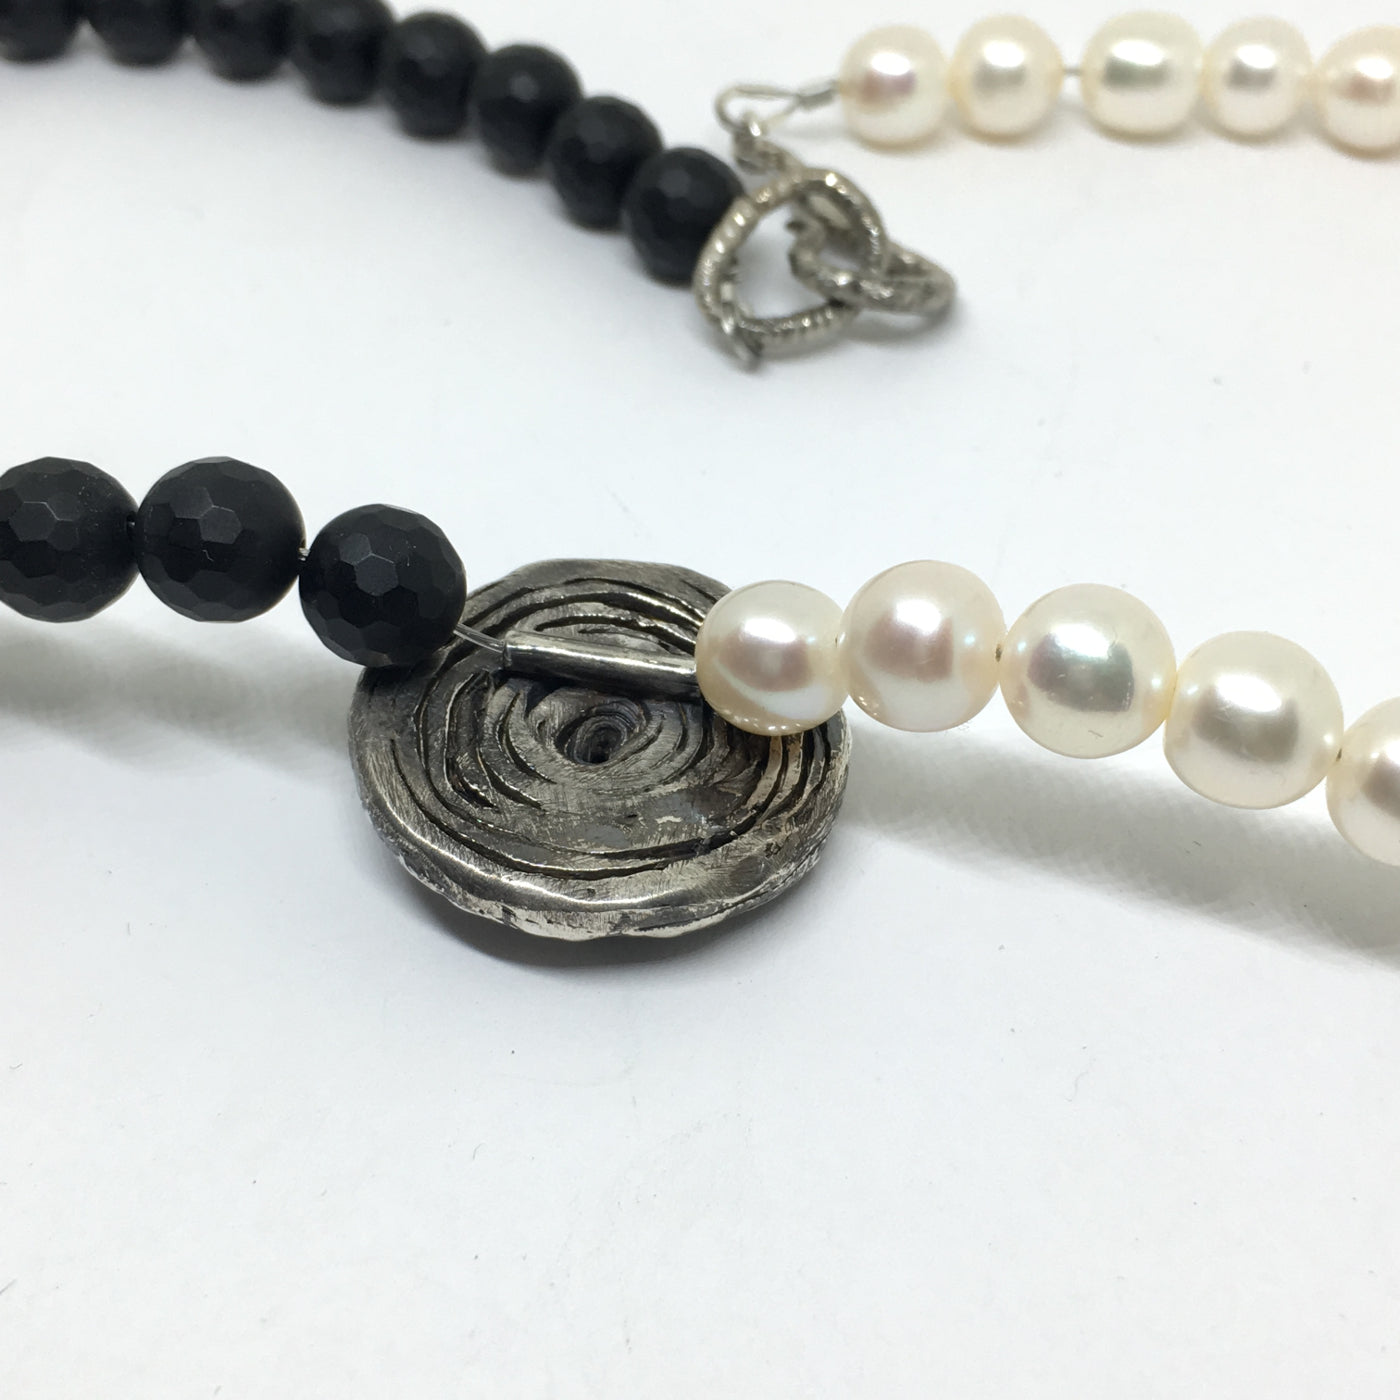 Onyx, Pearl and Diamond Statement Necklace - Asymmetrical Necklace with Mitsuro Hikime